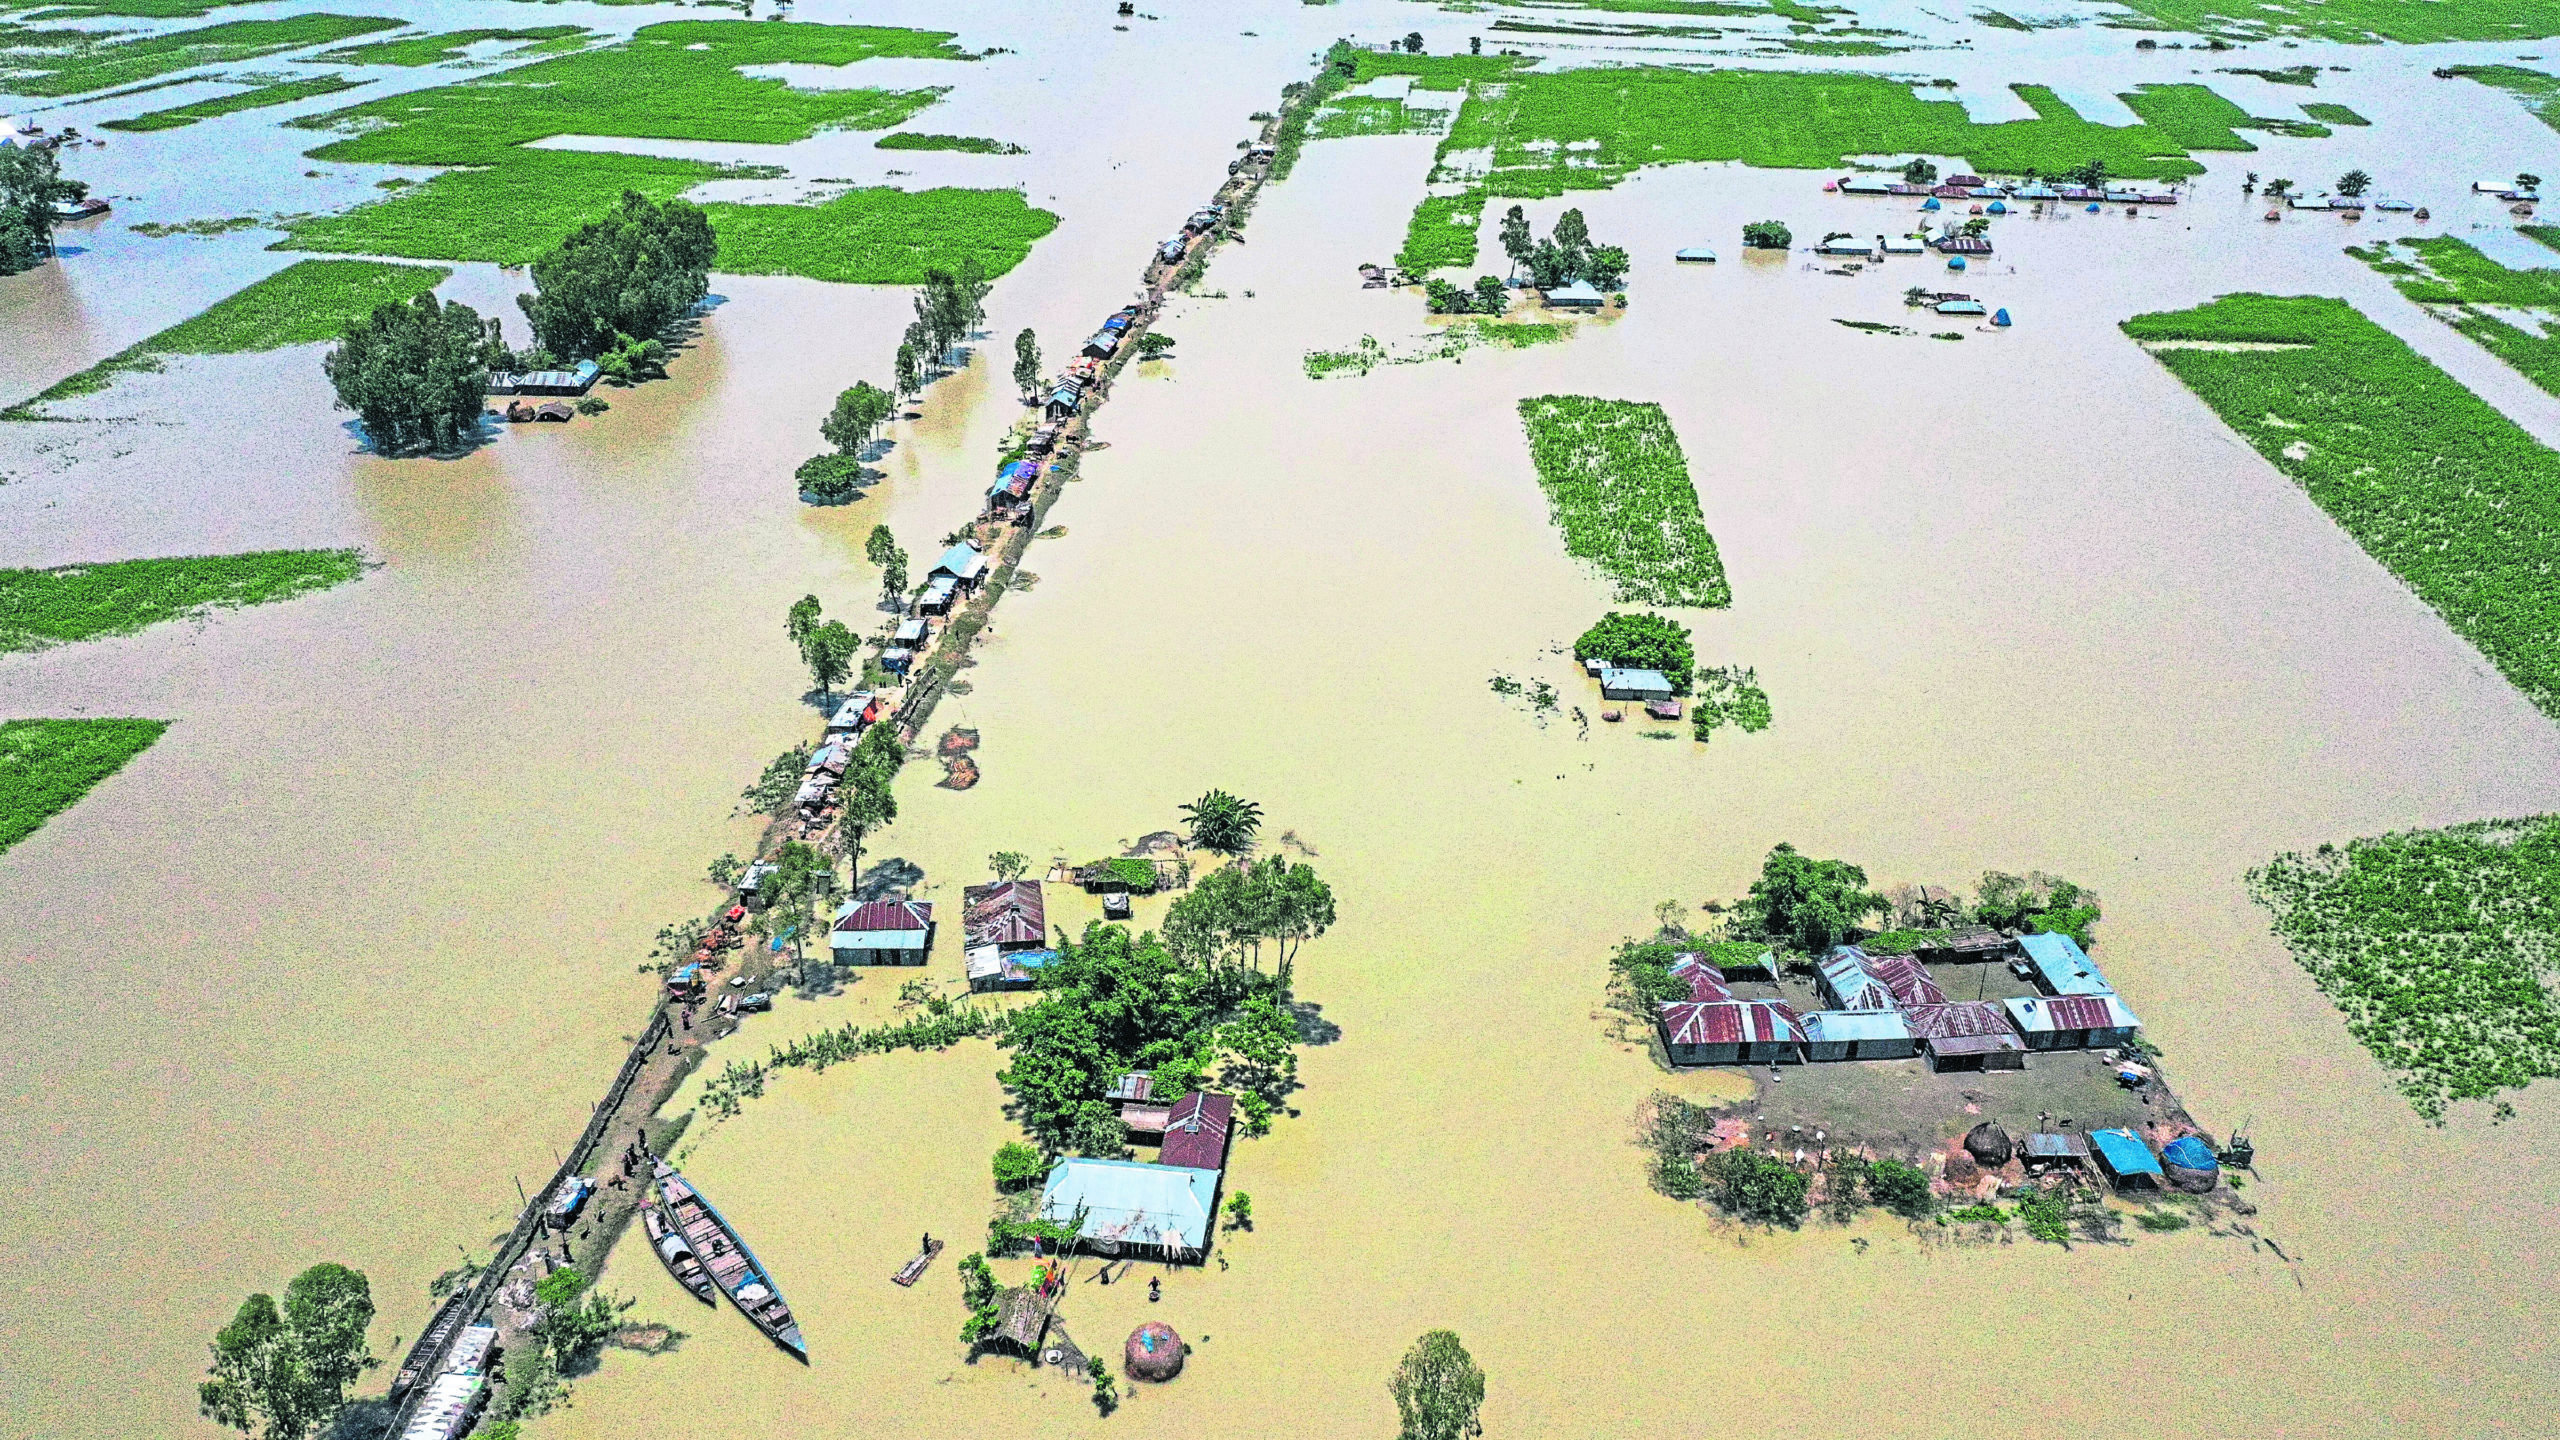 Floods hit in Bogura, Bangladesh in July 2020. Photo by Zabed Hasnain Chowdhury/SOPA Images/Shutterstock